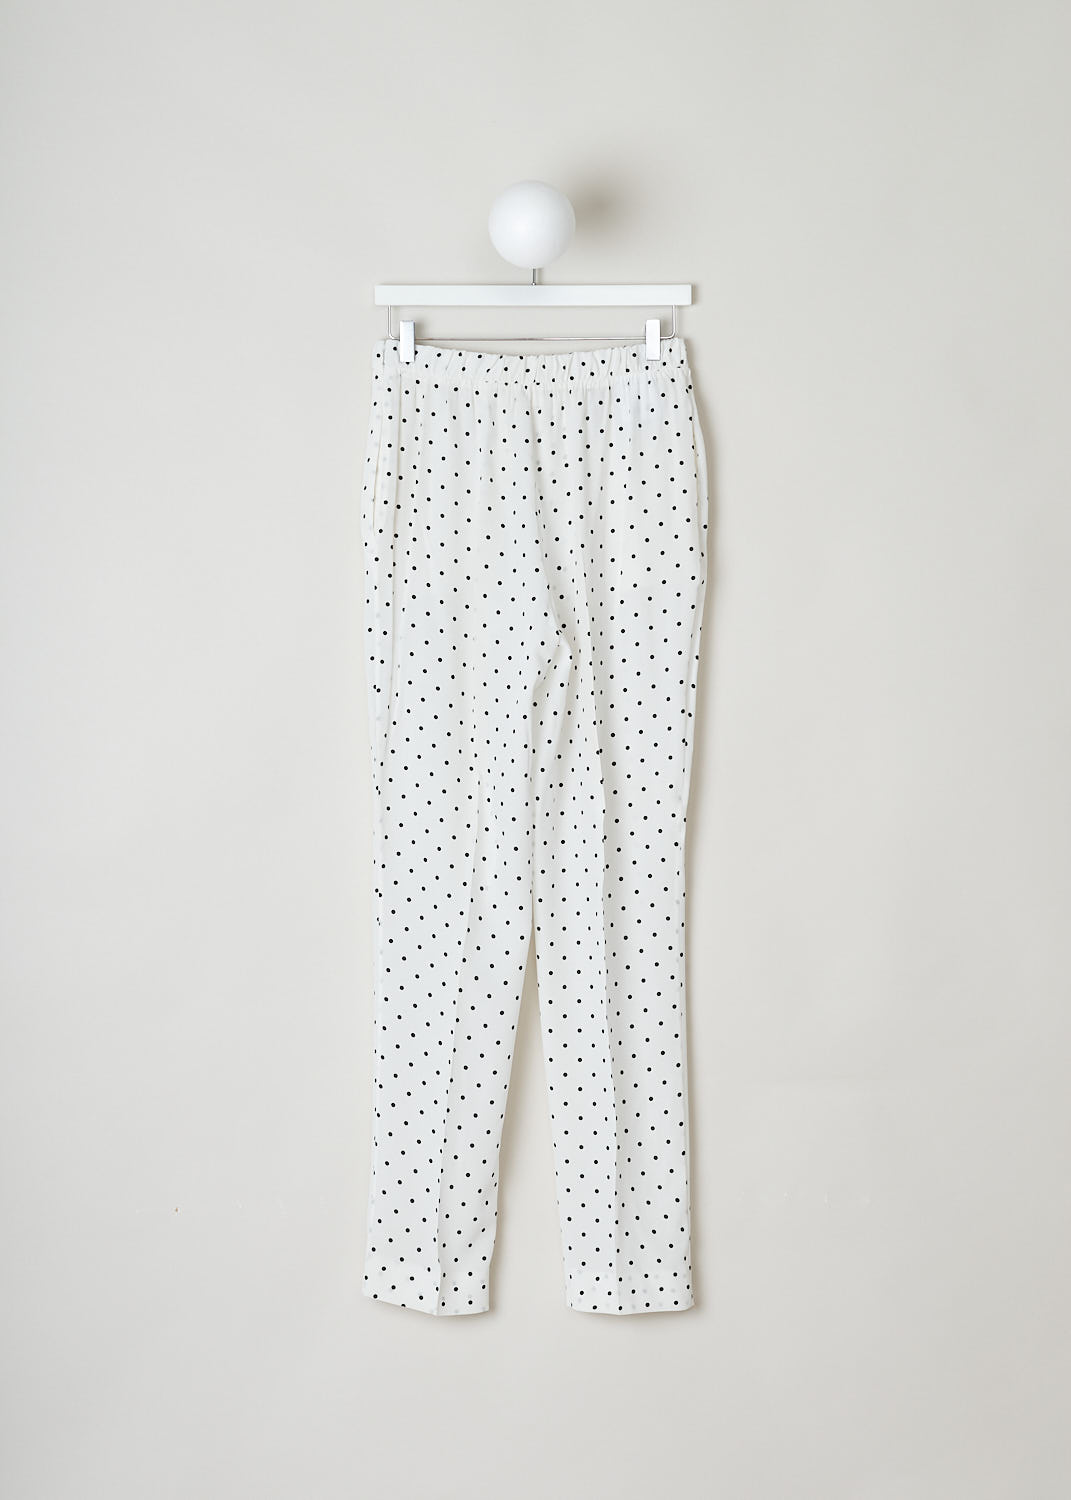 PRADA, WHITE SILK POLKA-DOT PRINT PANTS, CDC_POIS_P225EL_AVORIO_NERO, White, Print, back, This fun polka-dot print pants comes with a belted waist. The fabric could be described as semi see through.  A concealed zipper closure can be found along the seam. The pants has slanted pockets on each side. 